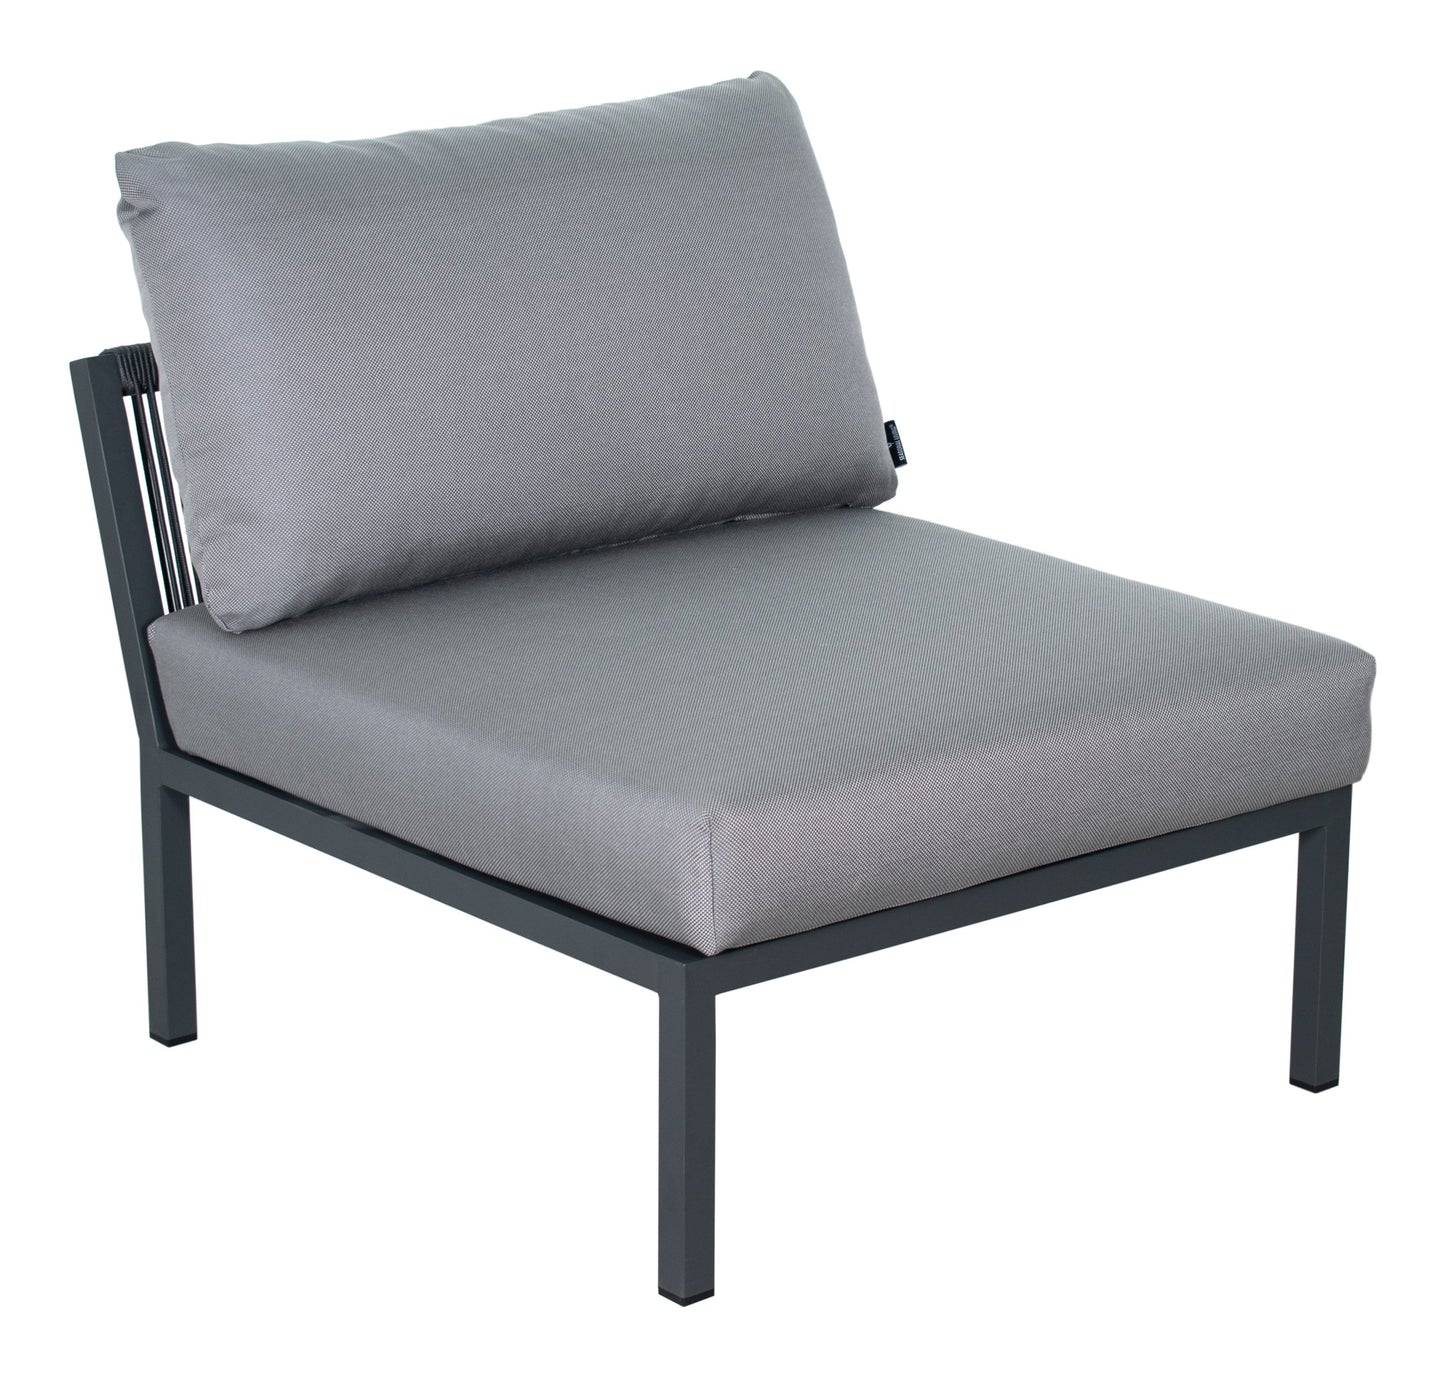 Sectional Armless Chair - Dark Gray Outdoor Modular-Outdoor Modulars-Seasonal Living-Sideboards and Things